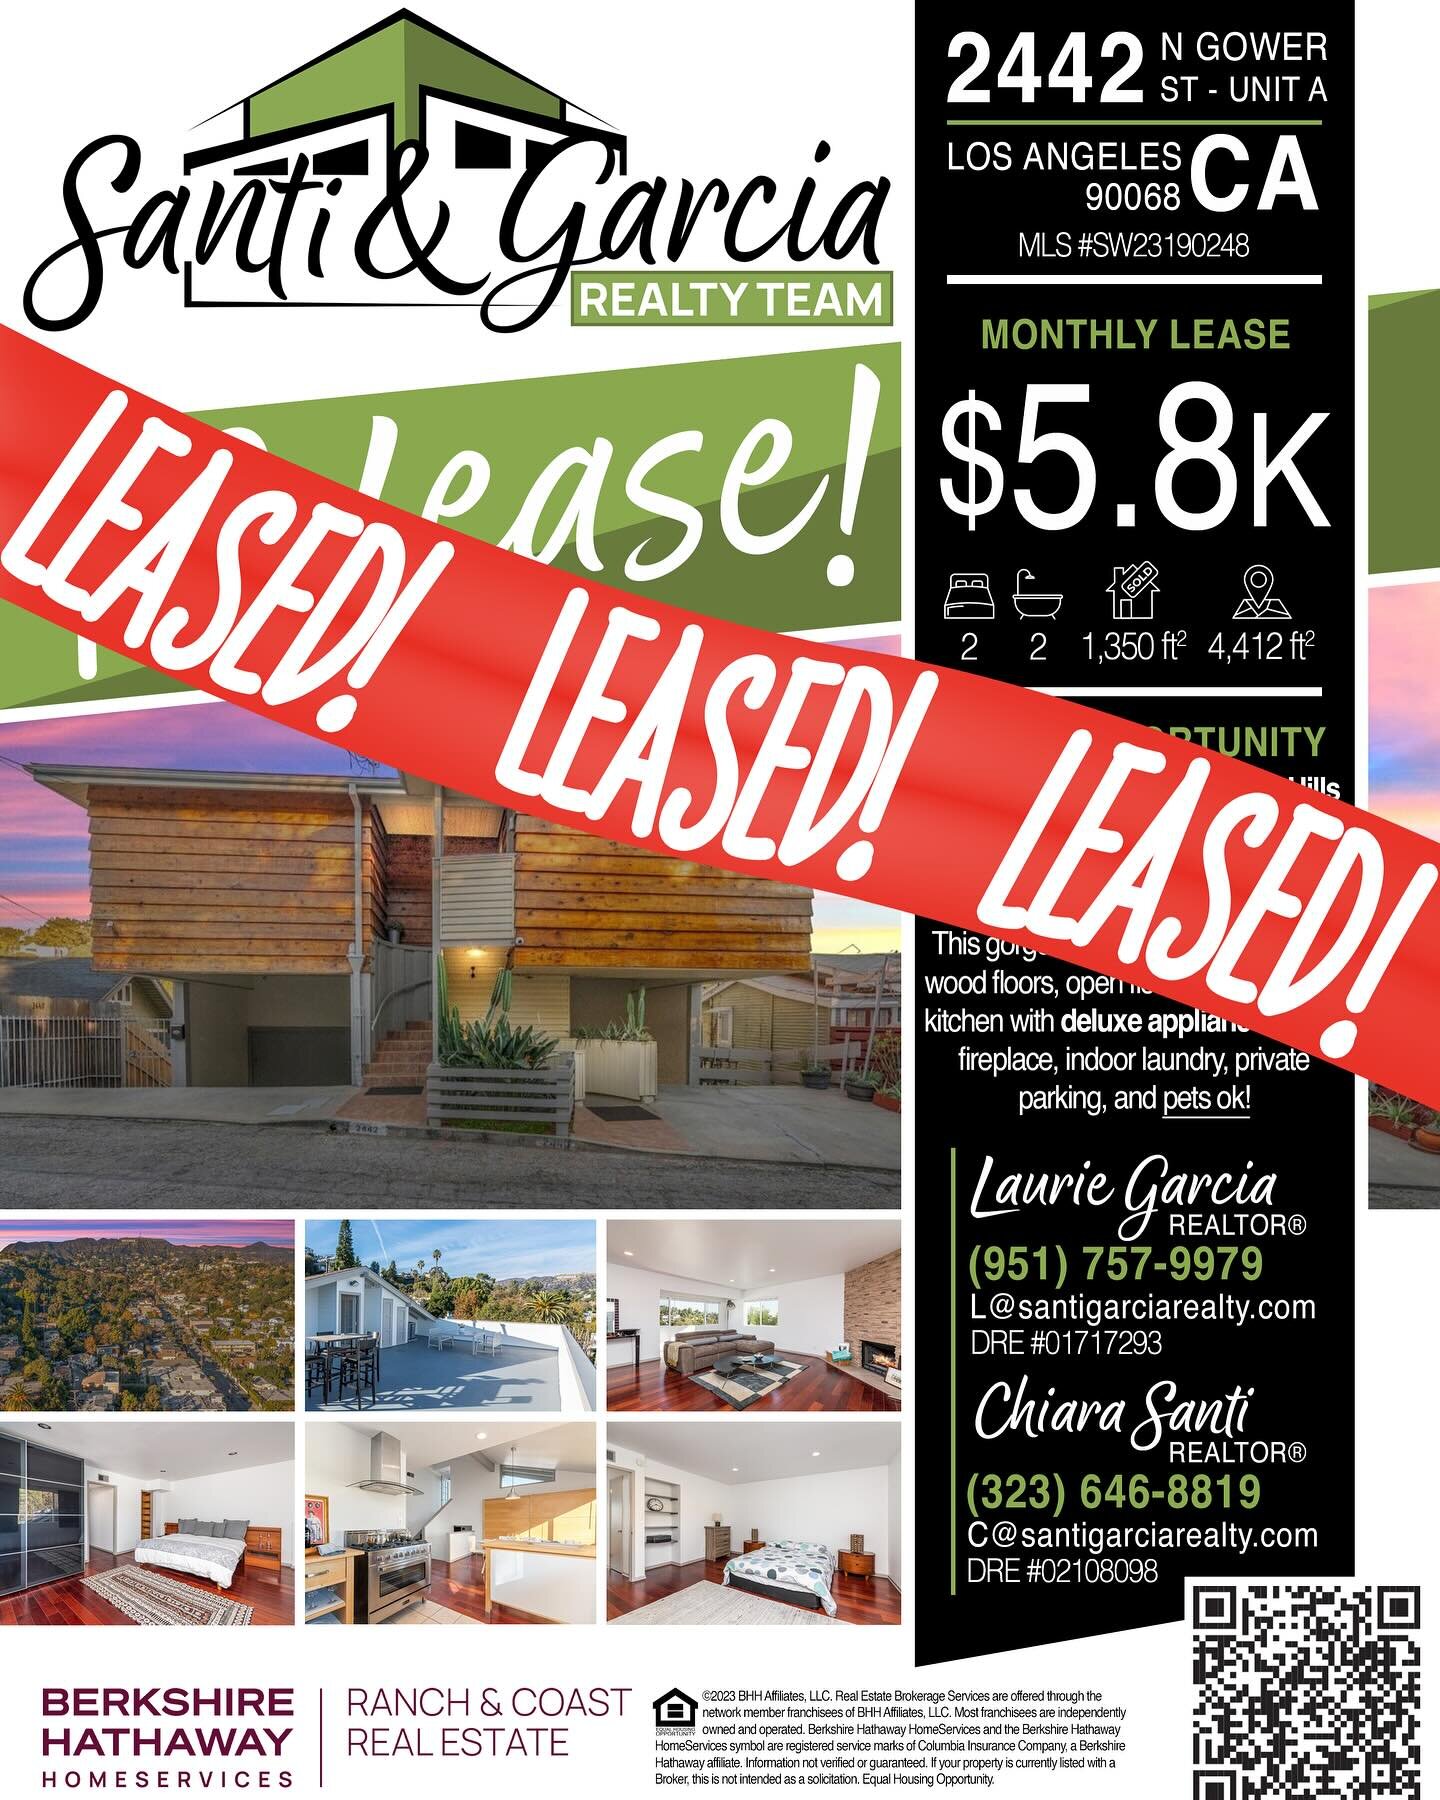 ✍️JUST LEASED‼️

📍2442 N Gower St. Unit A, Los Angeles, CA 90068

👉More info at santigarciarealty.com

#SantiGarciaRealty #realestate #realtor #realty #carealestategroup #commercialrealestate #residentialrealestate